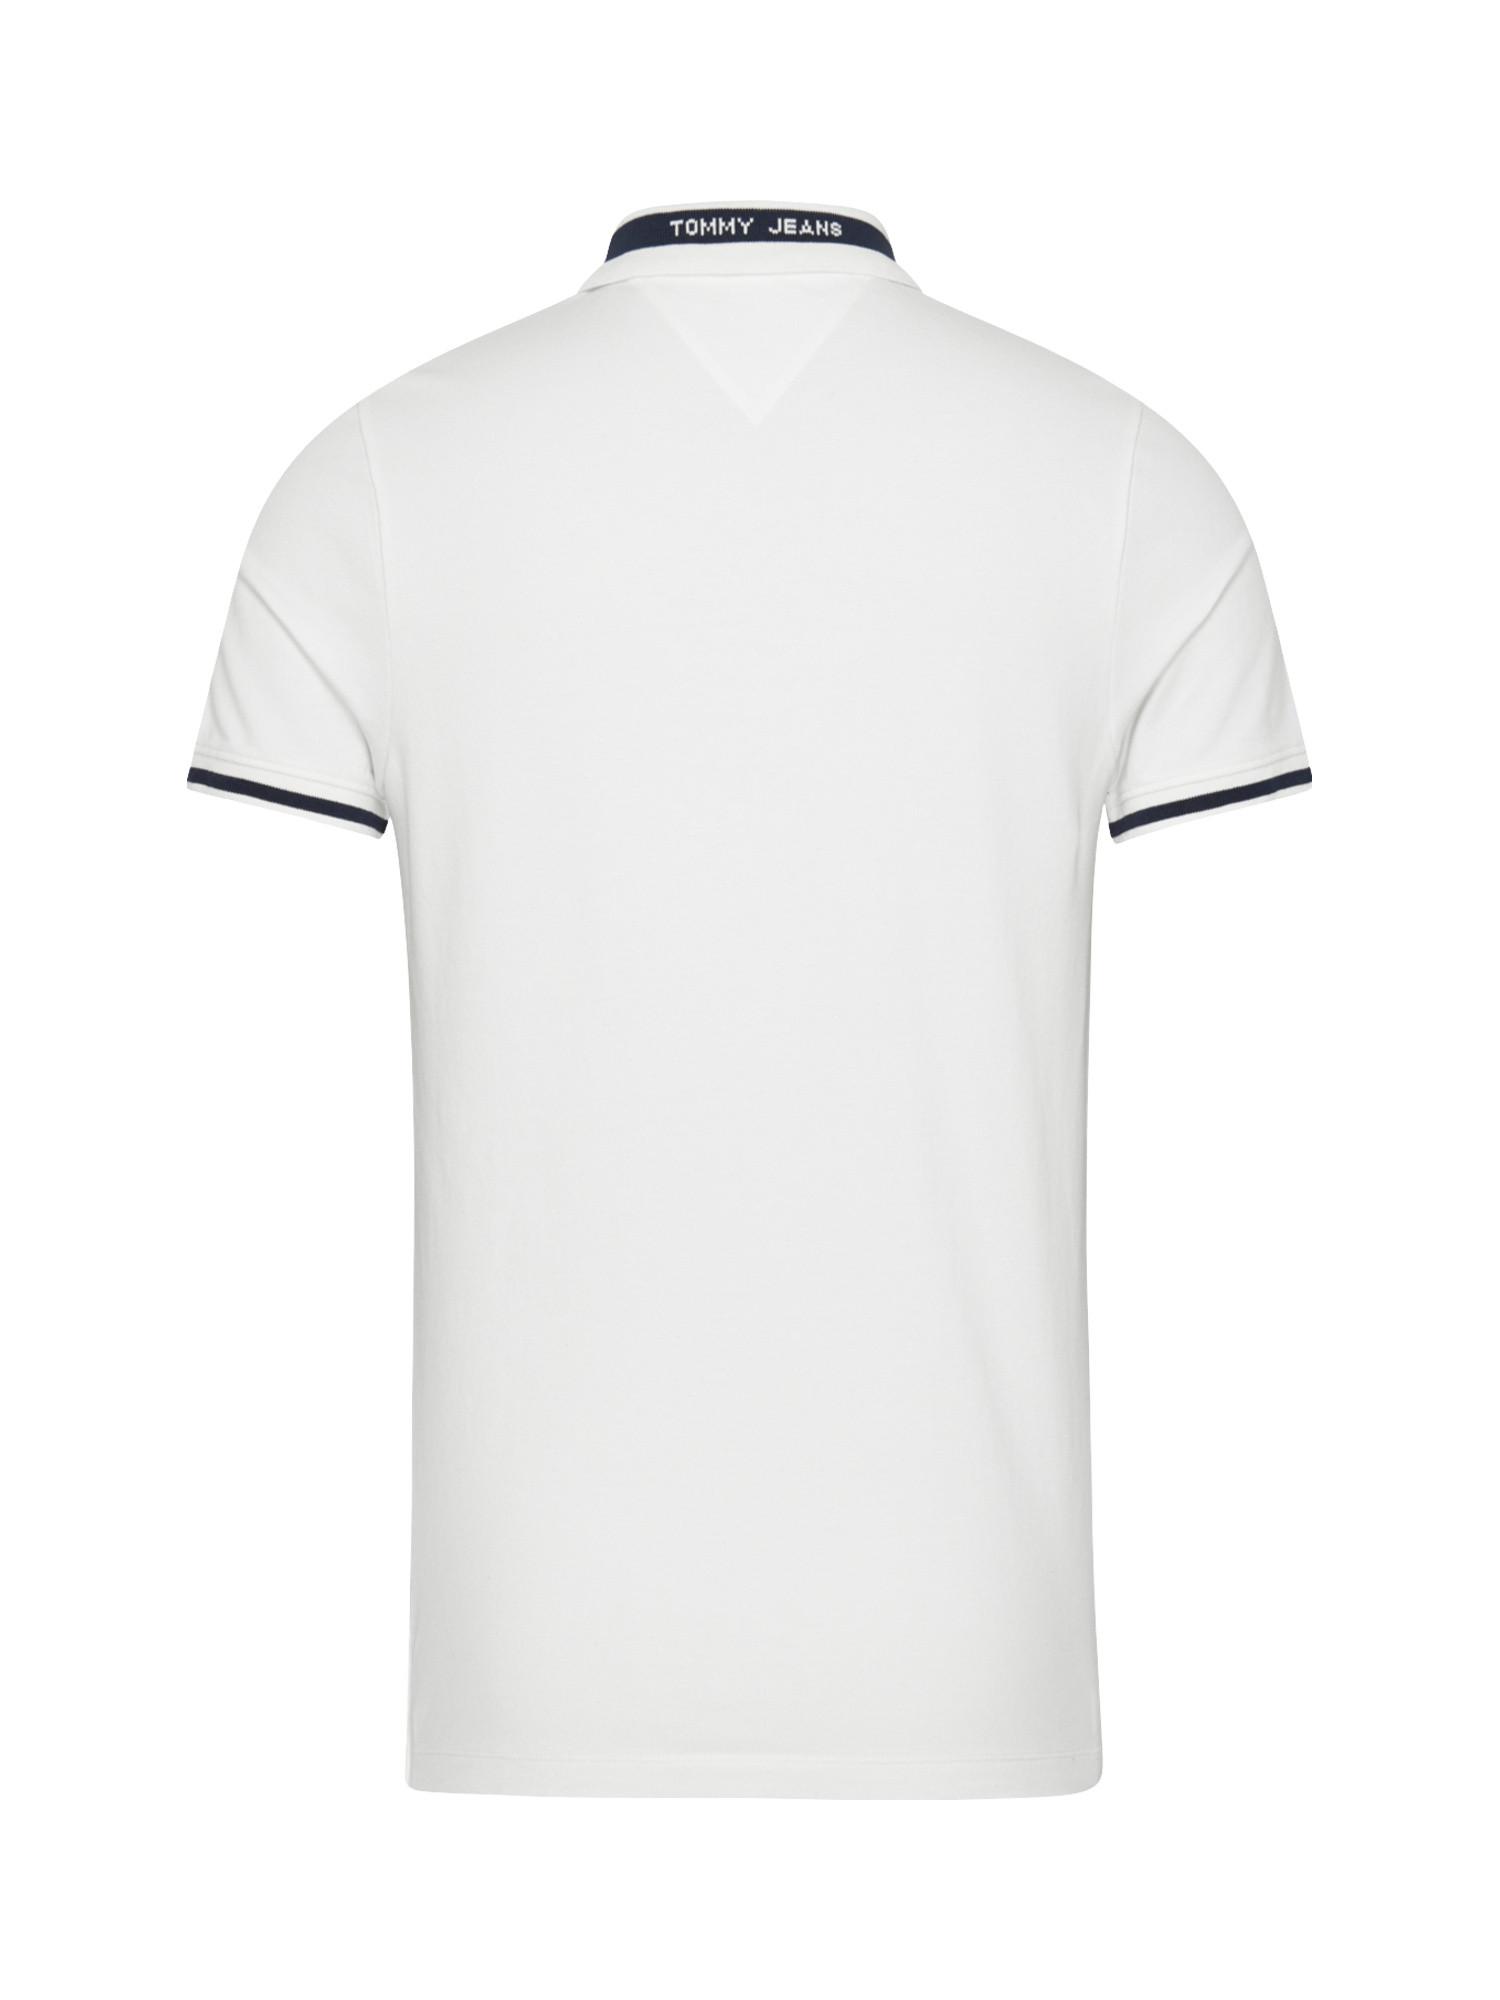 Polo stretch, Bianco, large image number 1